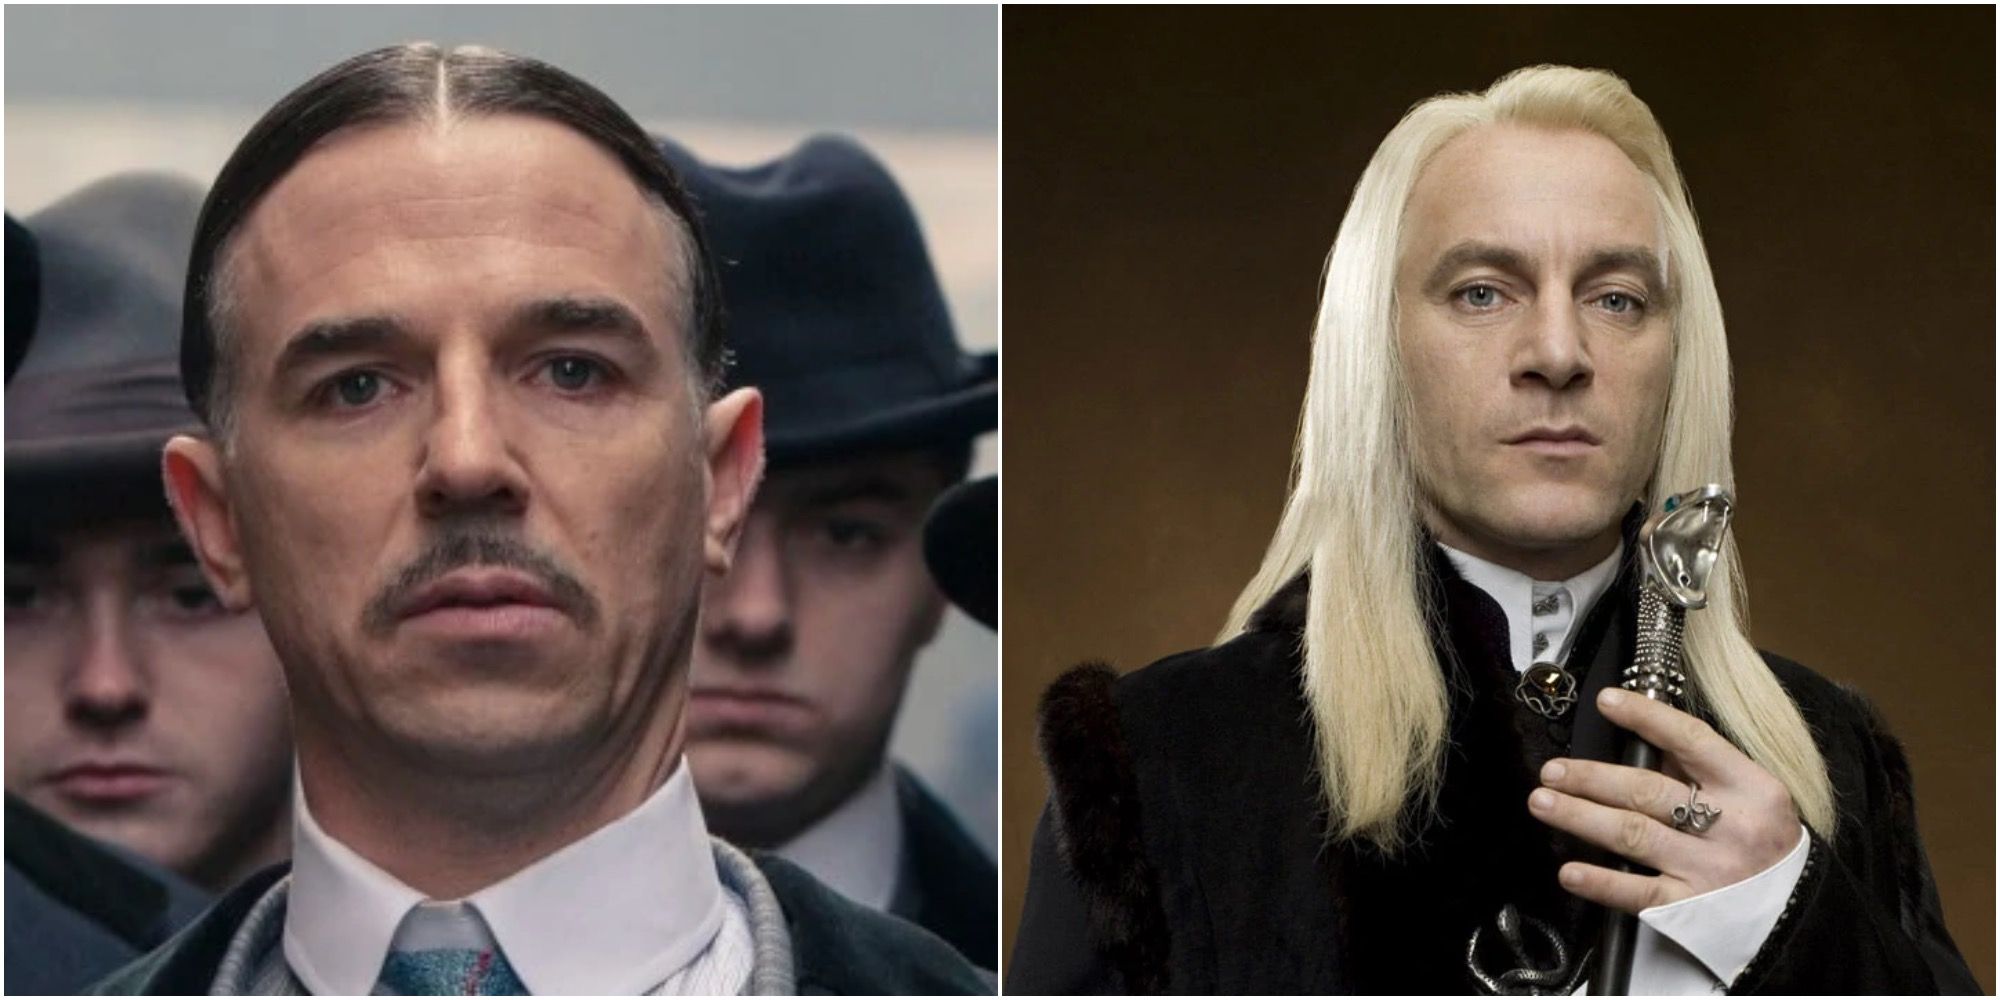 Split image of Billy Kimber (Peaky Blinders) and Lucius Malfoy (Harry Potter)